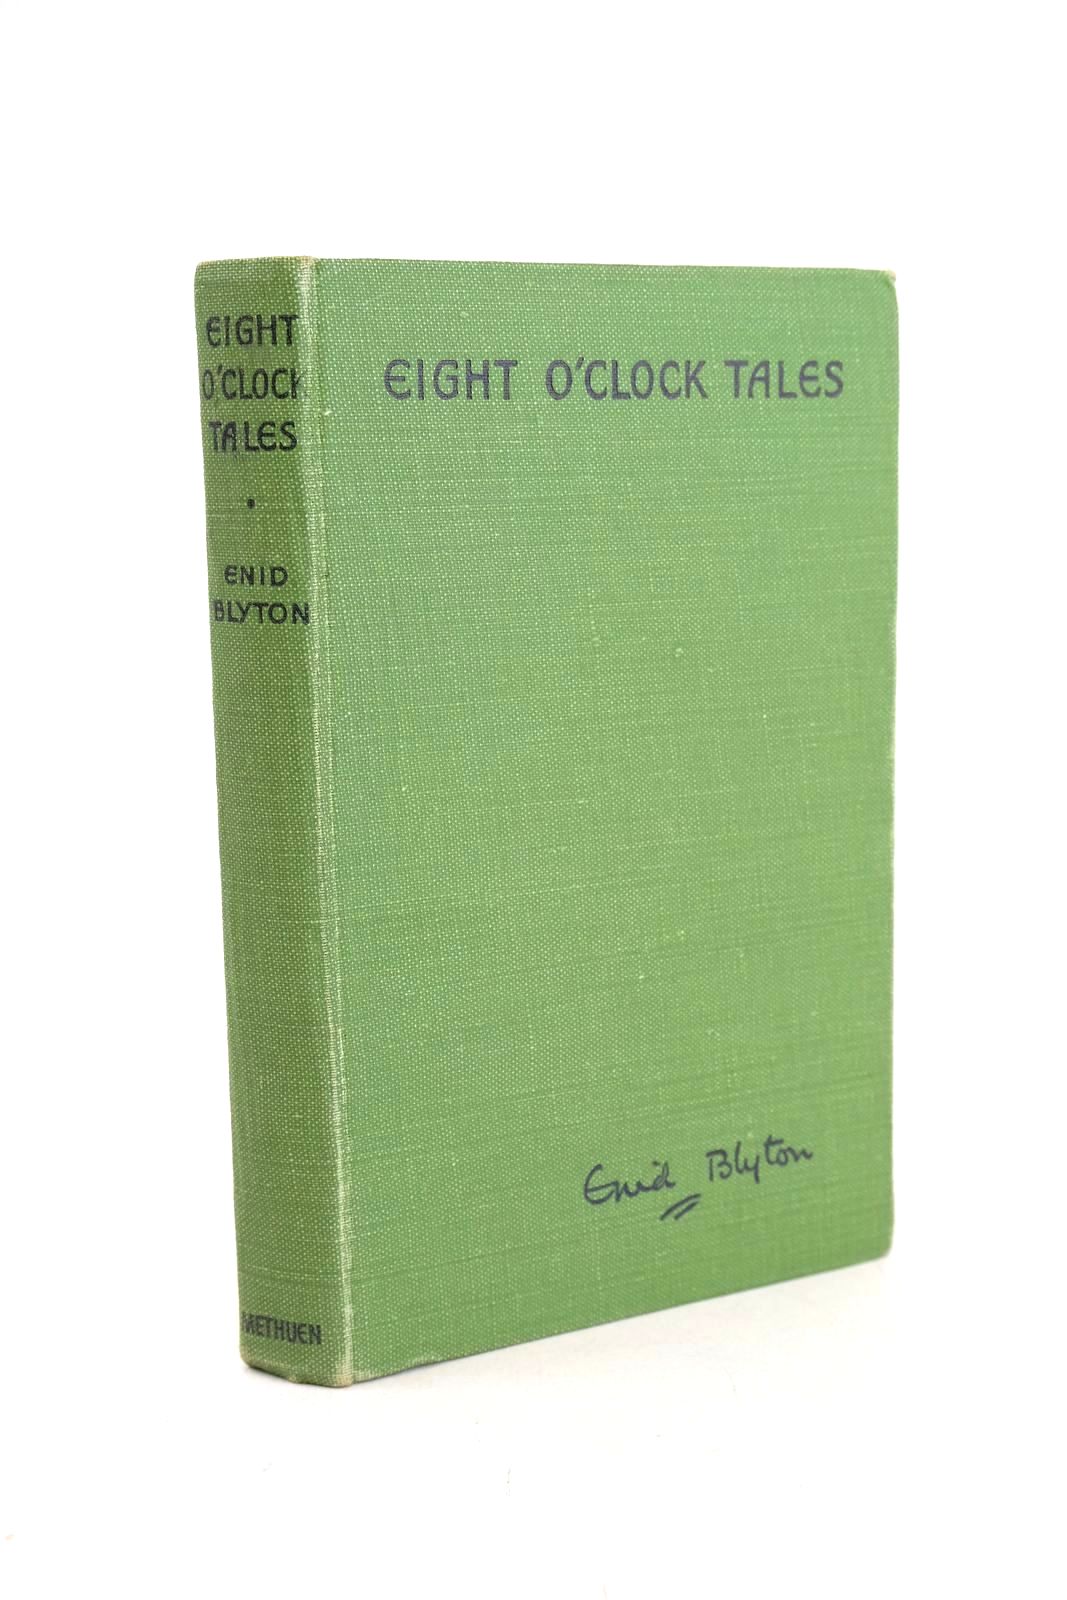 Photo of EIGHT O'CLOCK TALES written by Blyton, Enid illustrated by Wheeler, Dorothy M. published by Methuen &amp; Co. Ltd. (STOCK CODE: 1326752)  for sale by Stella & Rose's Books